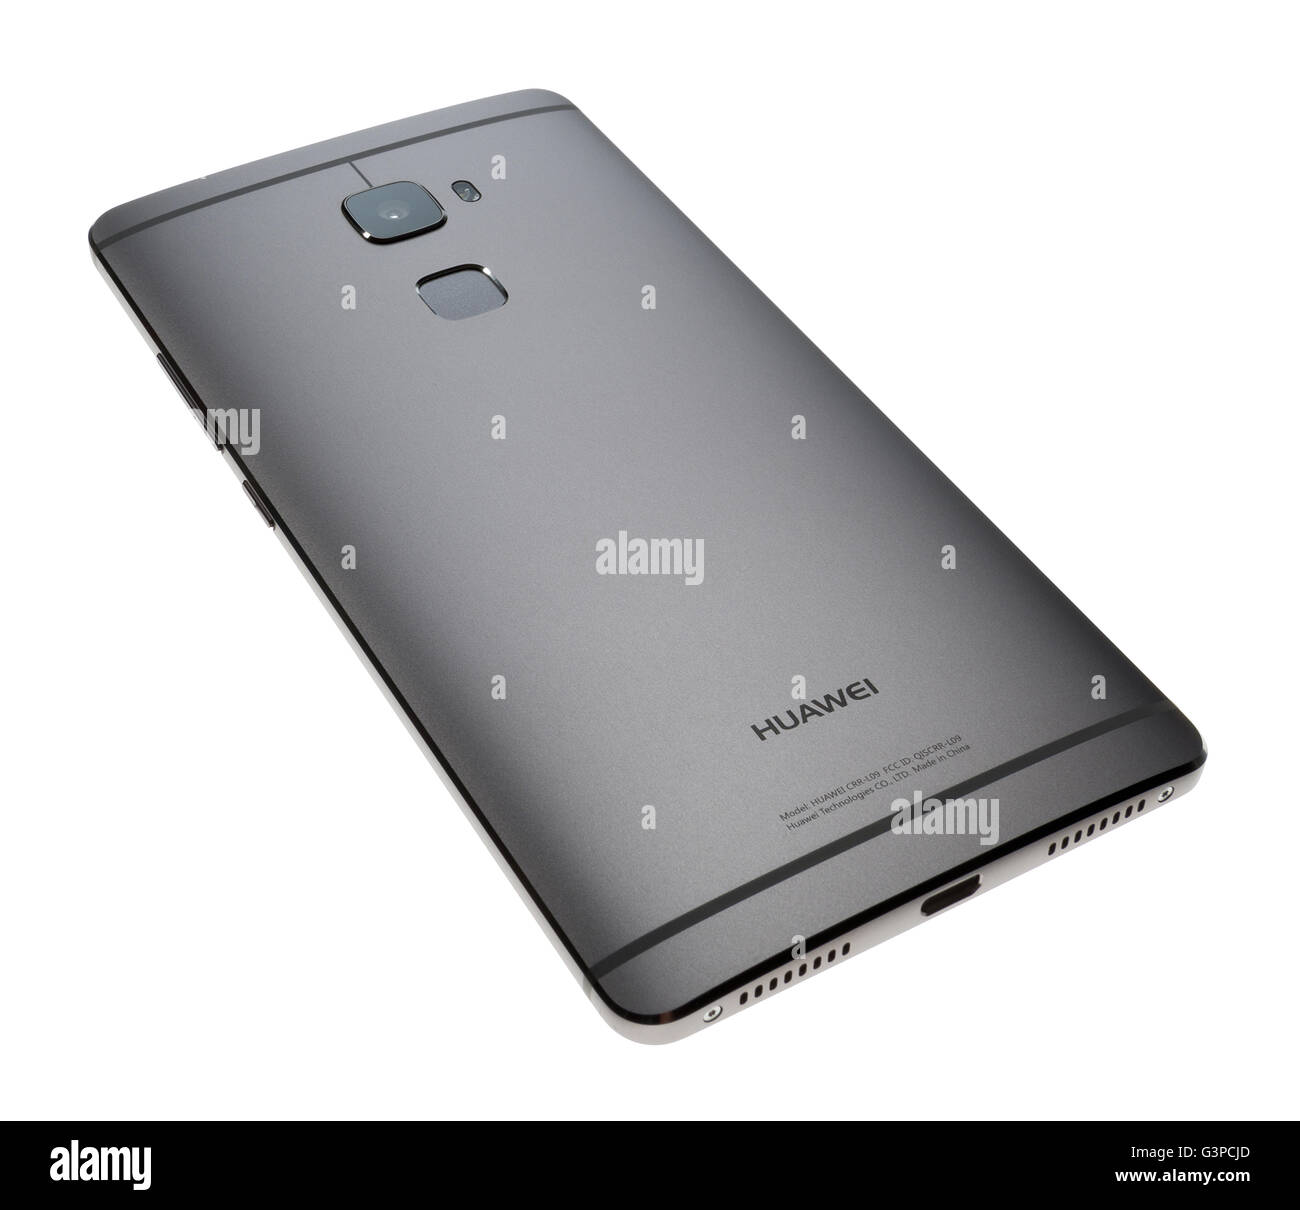 Huawei Mate S mobile phone or cellphone. Back of device showing camera lens and fingerprint scanner. Stock Photo